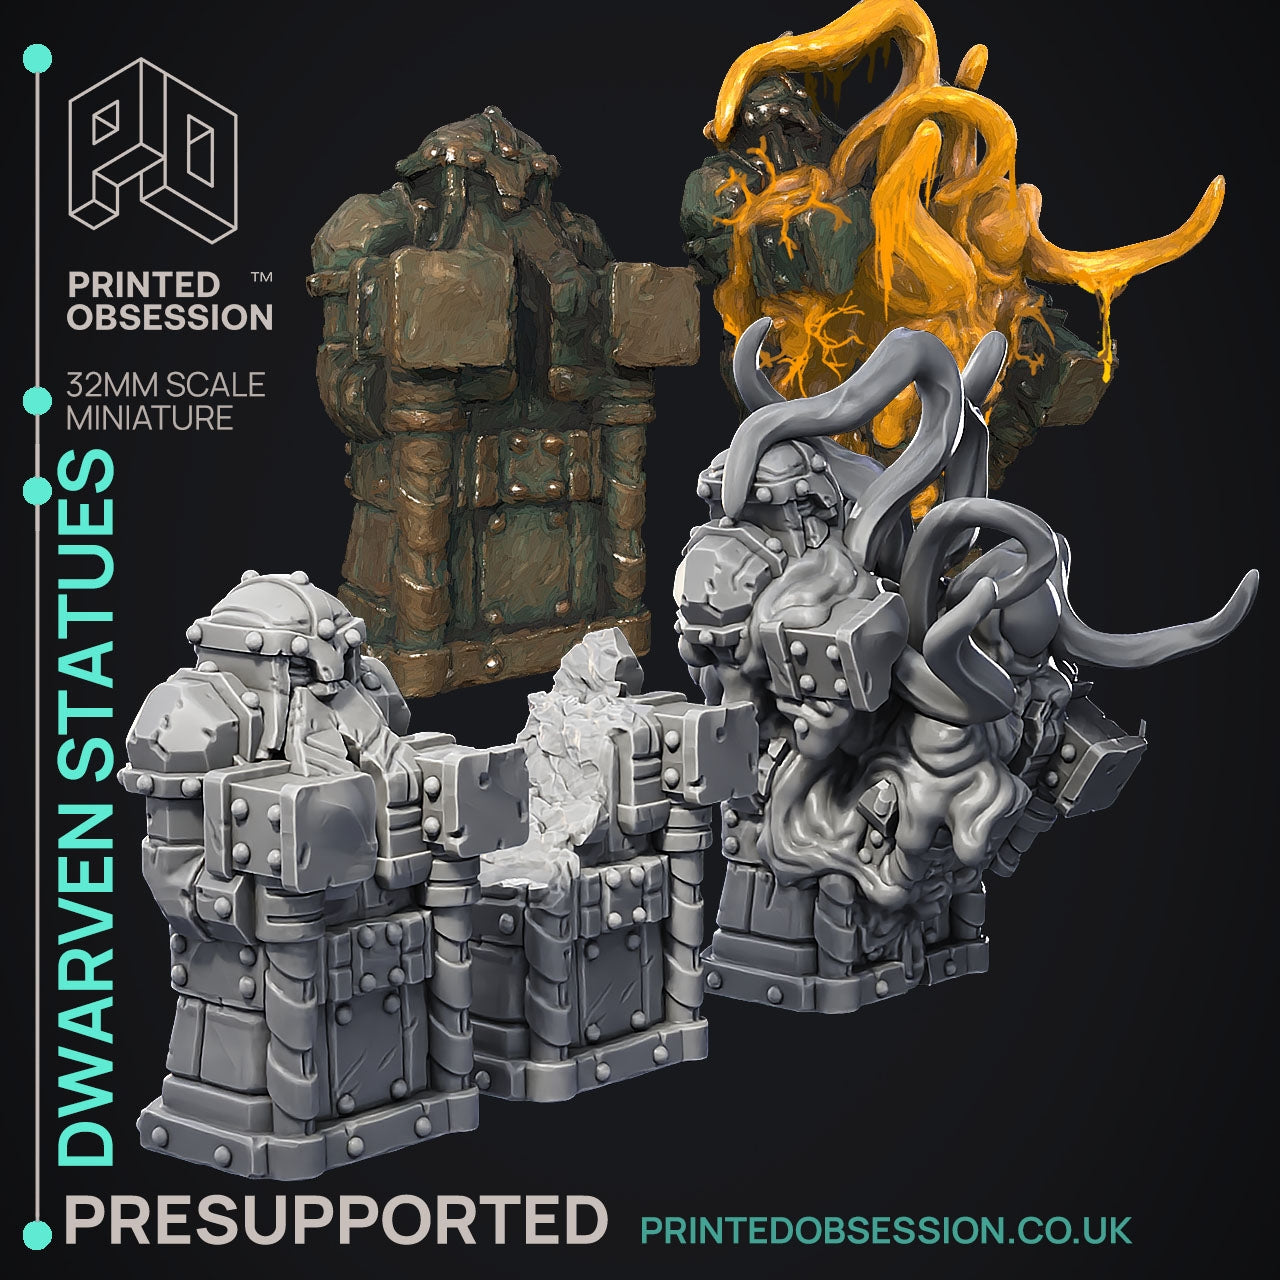 Dwarven Statues - Mimic - The Scrap Wastes - The Printed Obsession - Table-top mini, 3D Printed Collectable for painting and playing!